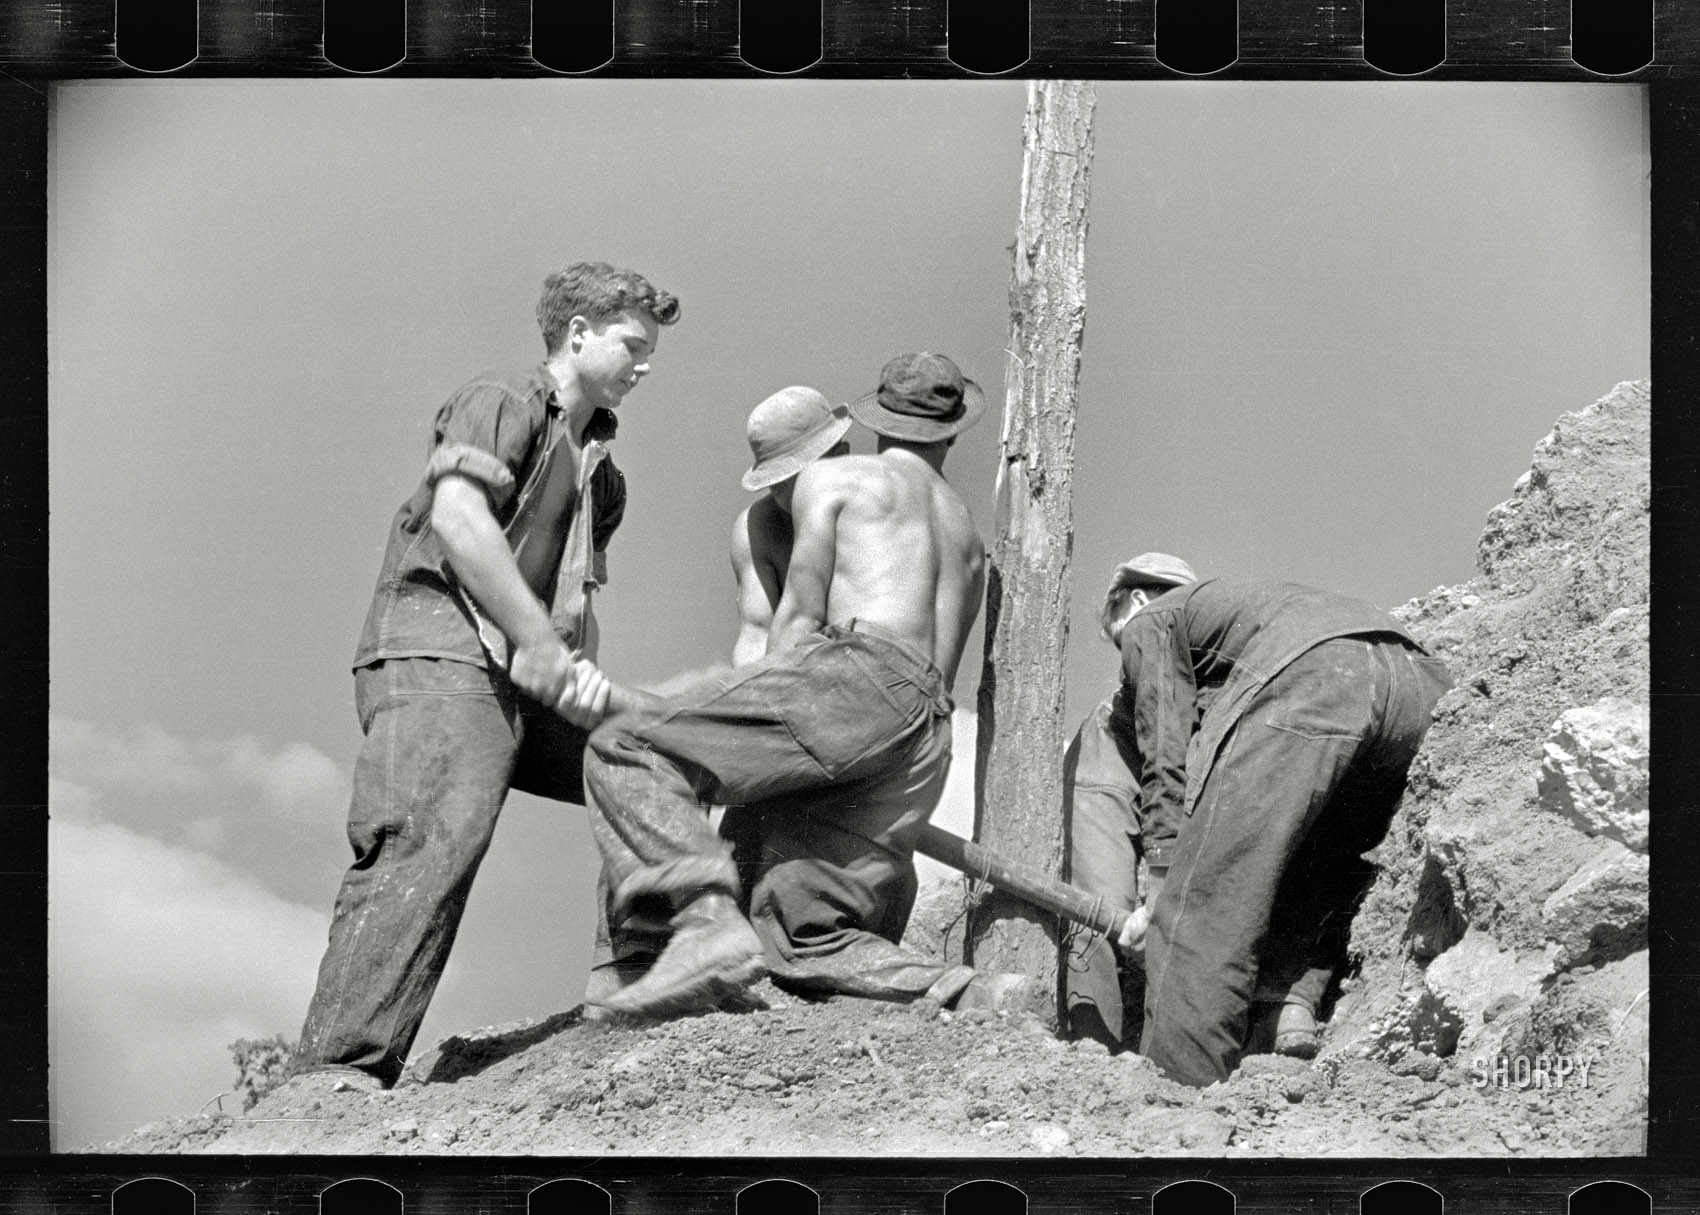 November 1935. Prince George's County, Maryland. "CCC boys at work." Another one of those Civilian Conservation Corps projects that involved lots of photogenic exertion. 35mm negative by Carl Mydans for the FSA. View full size.